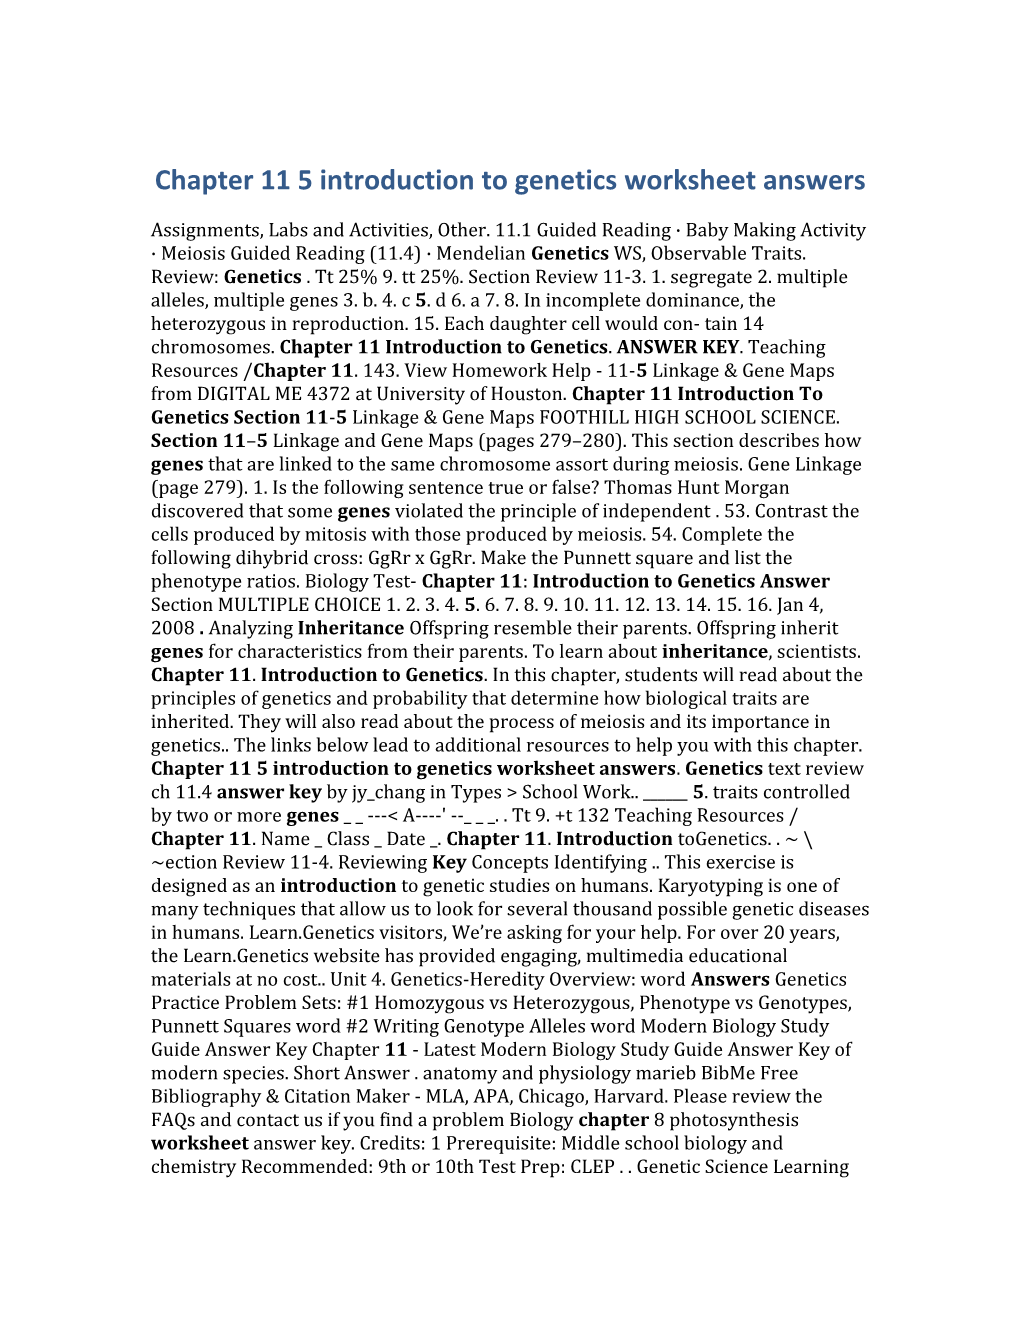 Chapter 11 5 Introduction to Genetics Worksheet Answers